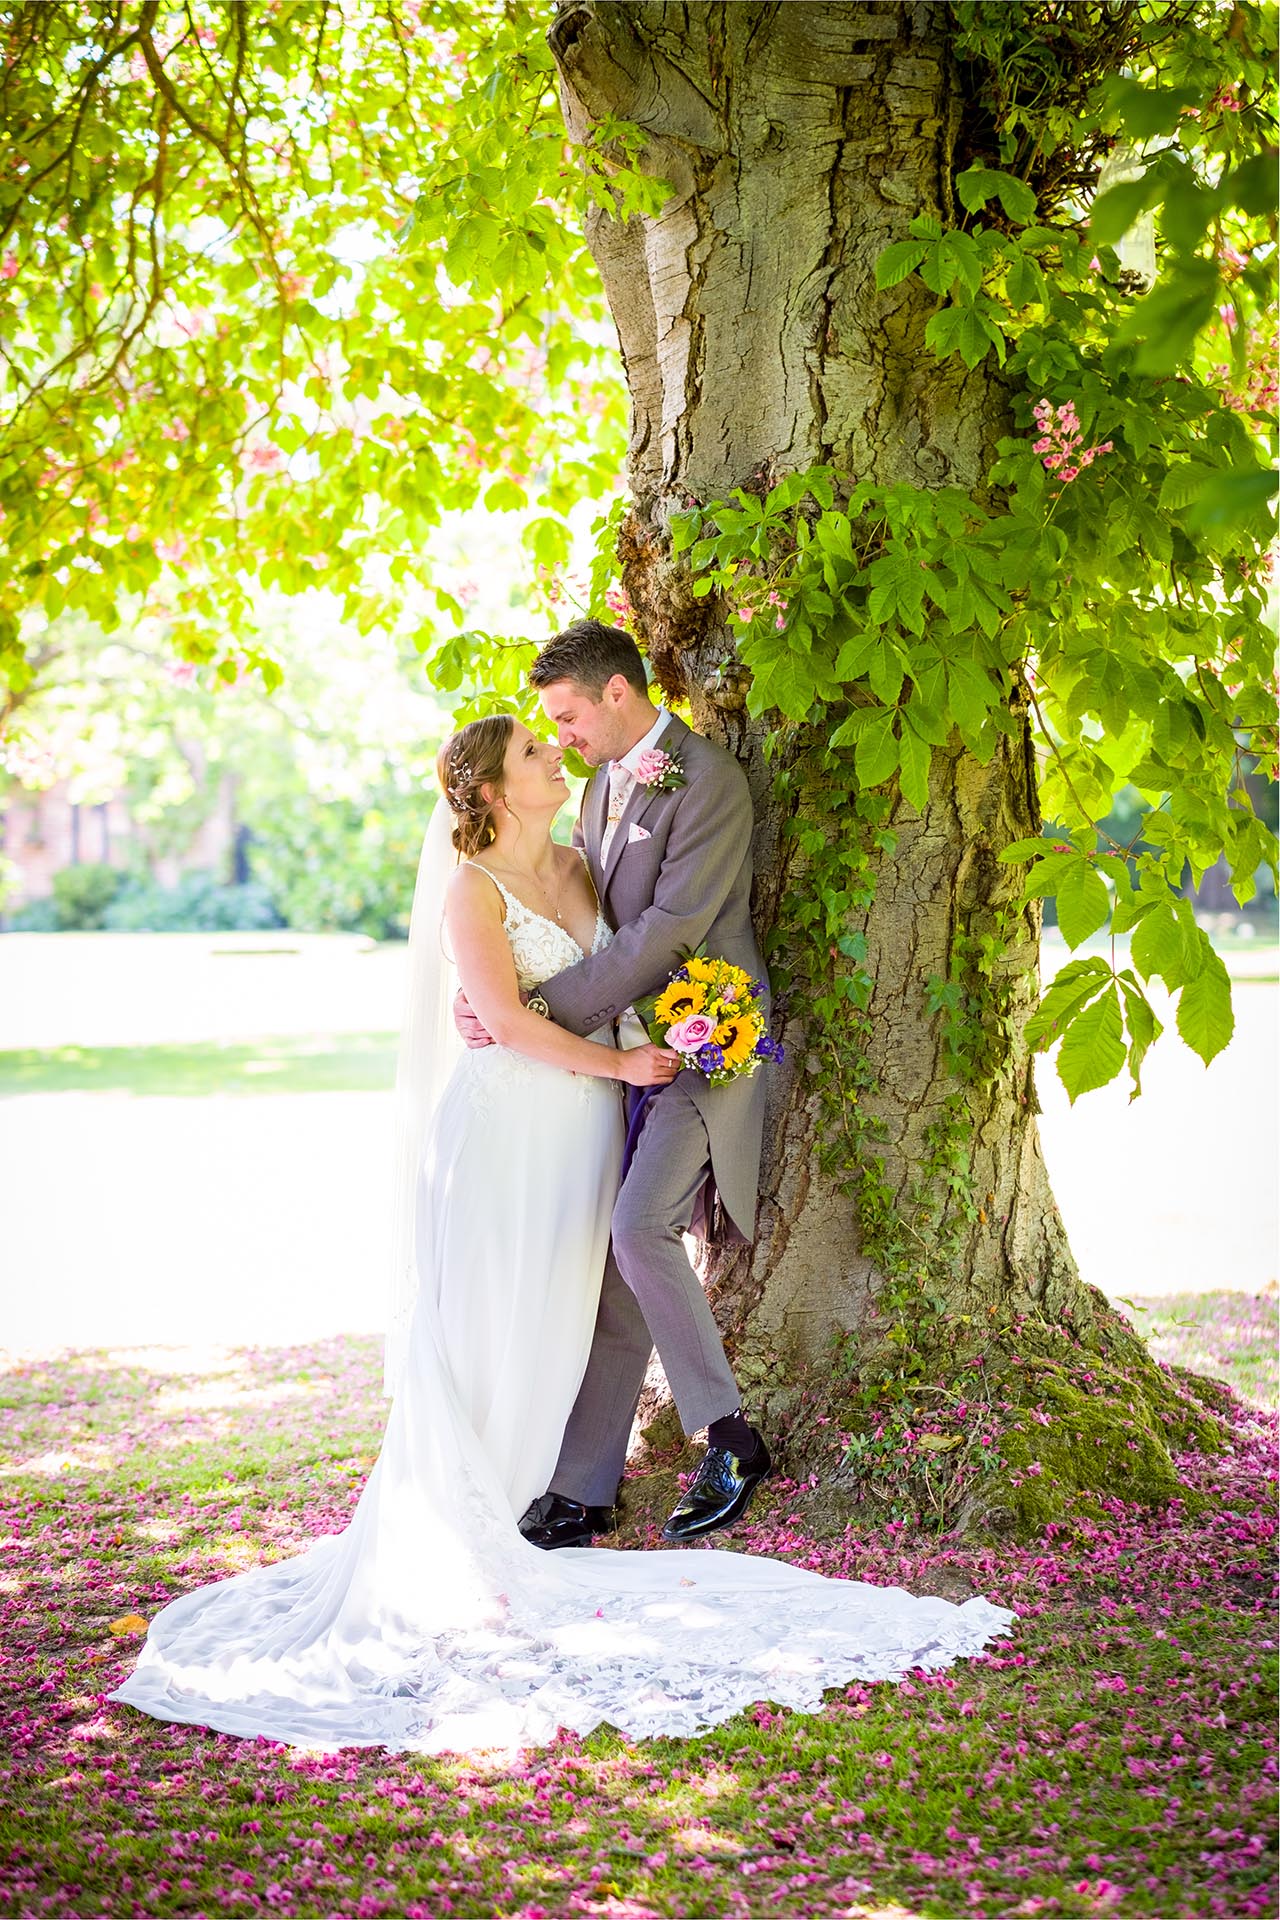 Wedding potography of bride and groom at Leez Priory, Great Leighs, Chelmsford